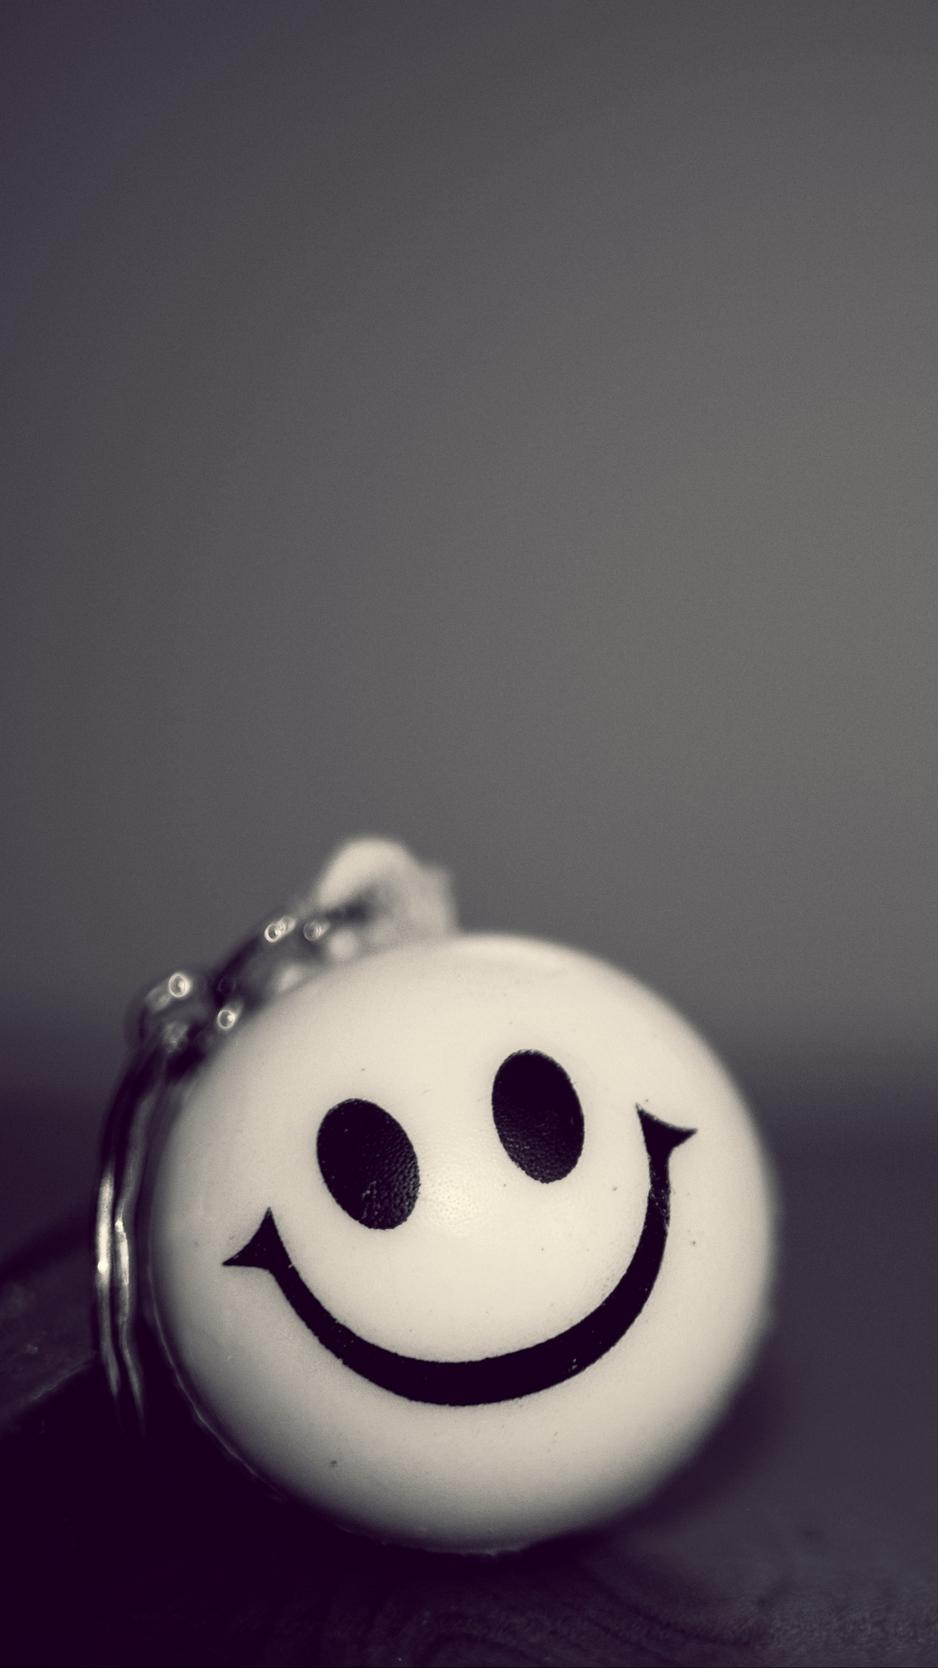 Download wallpaper 938x1668 smiley, smile, bw, keychain